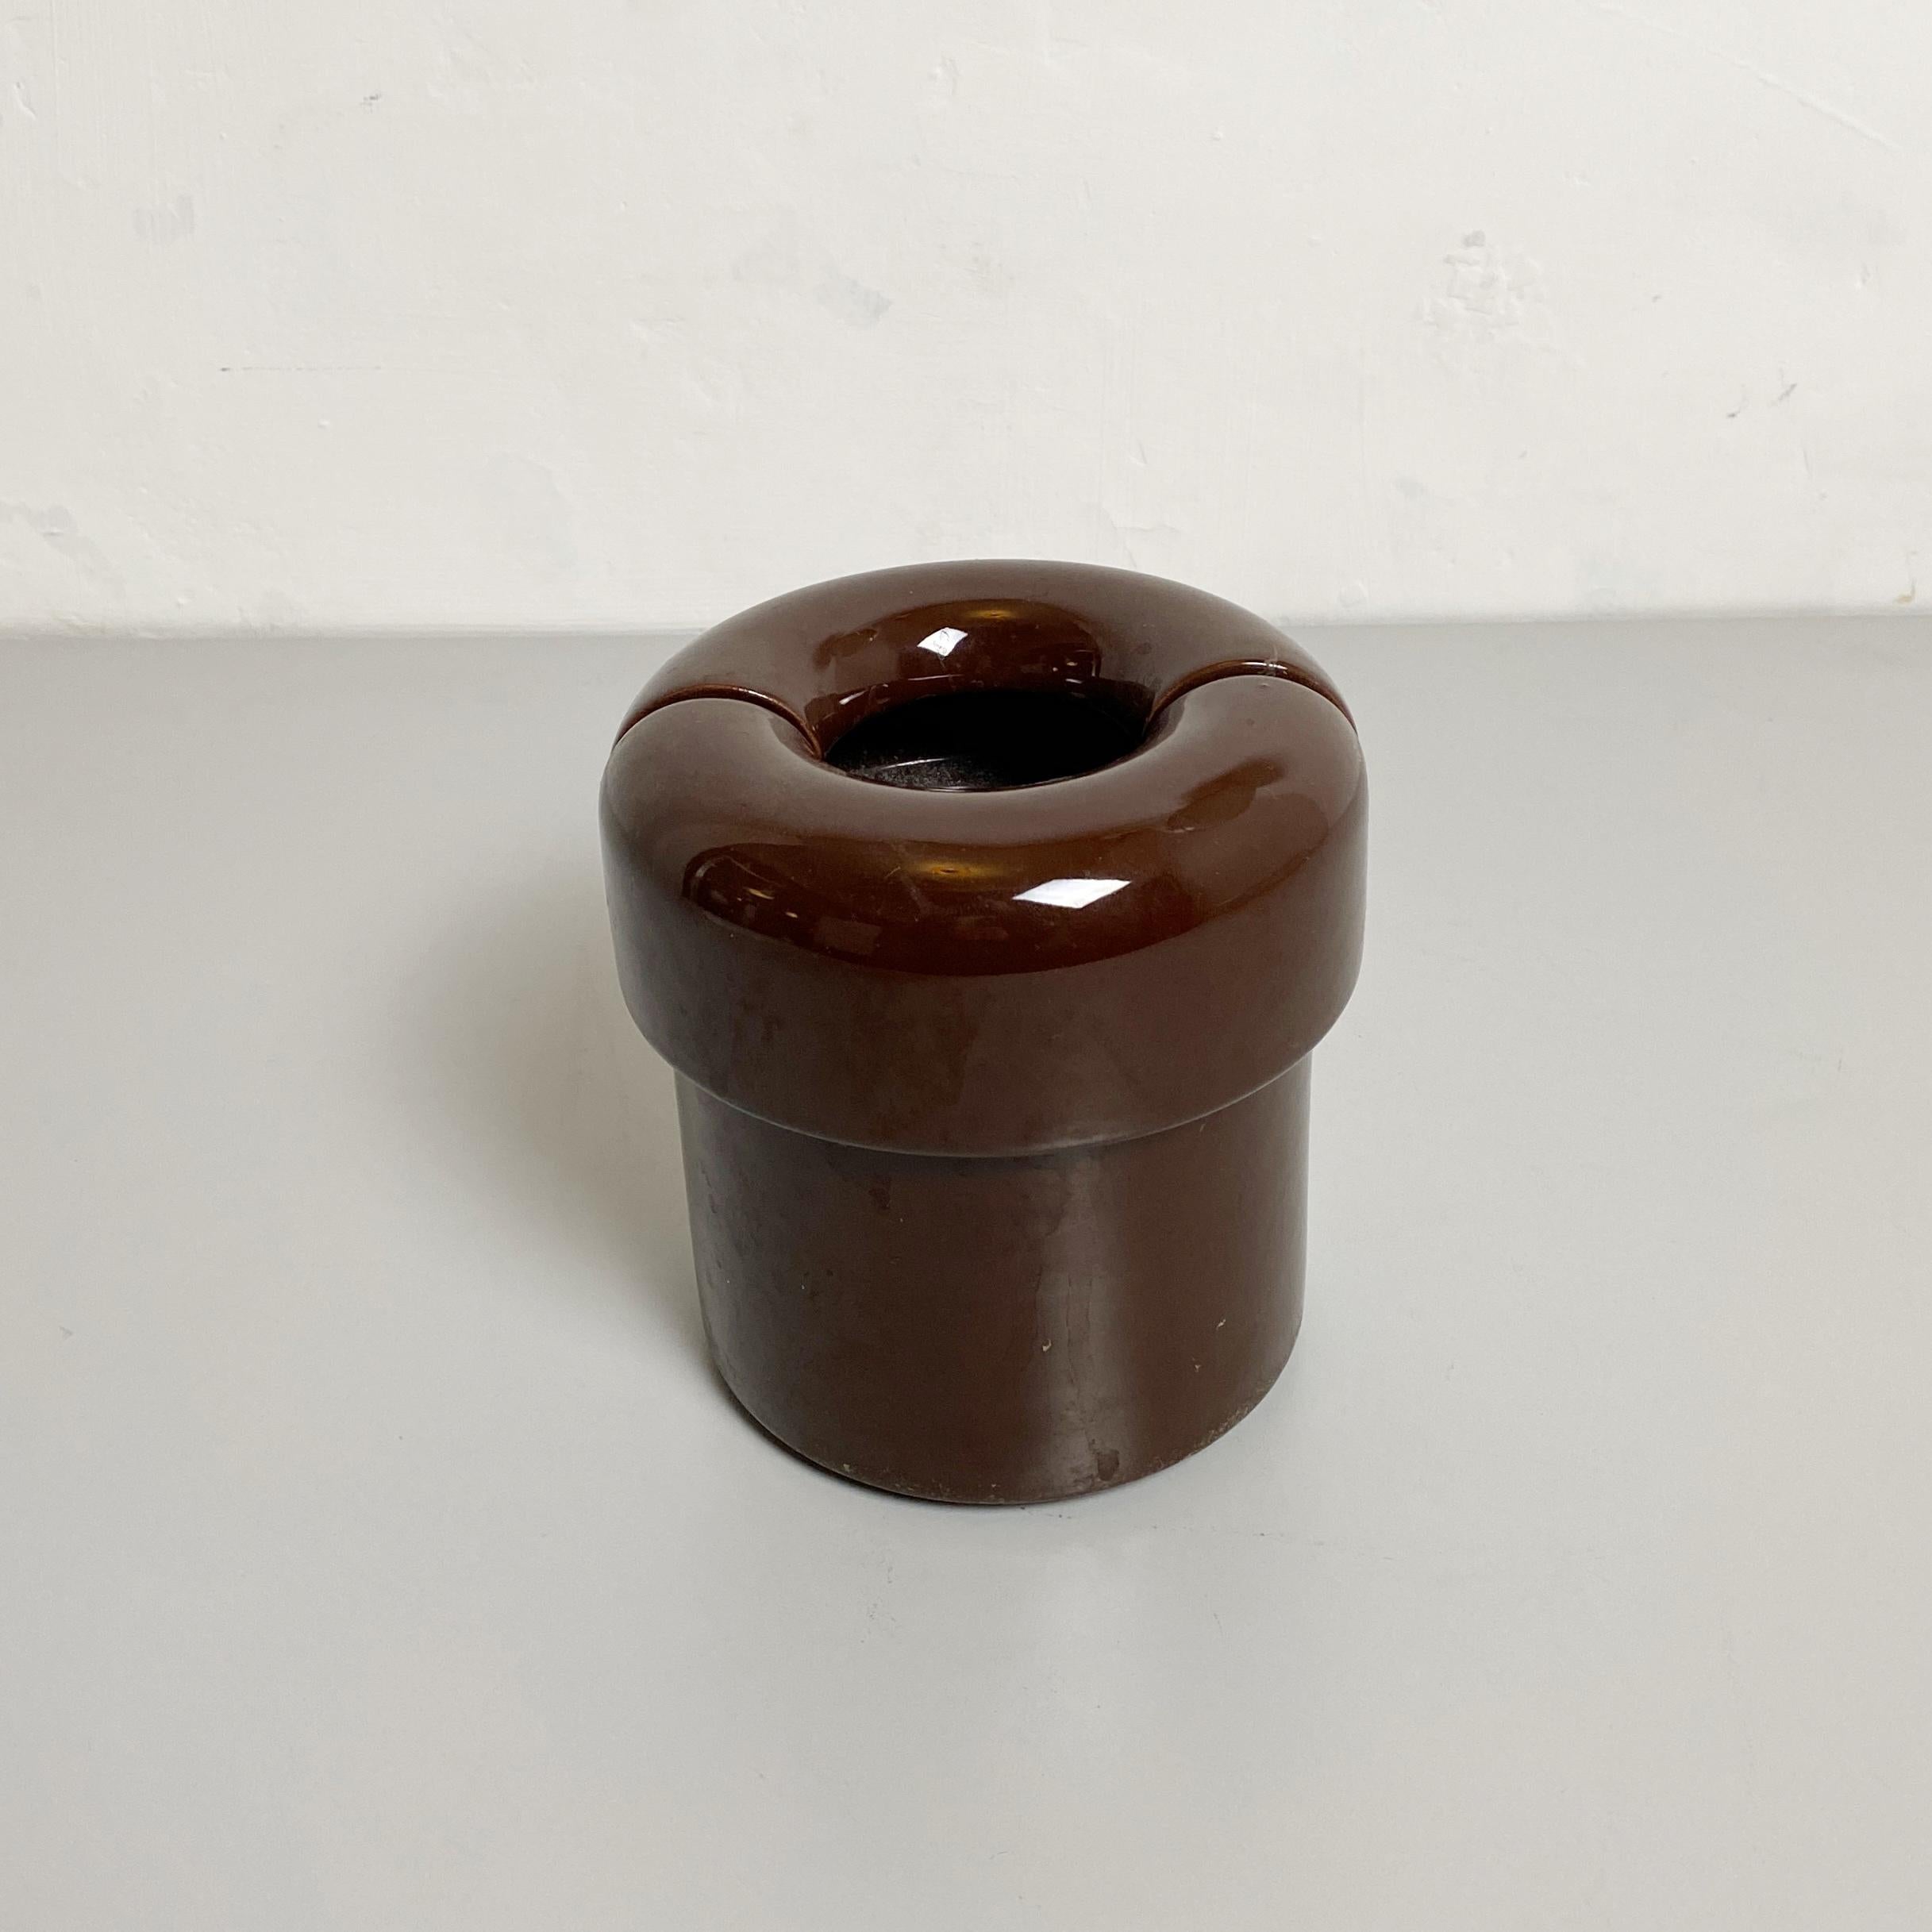 Mid-20th Century Italian Mid-Century Modern Brown Ceramic Vase by Lineareorm, 1960s For Sale